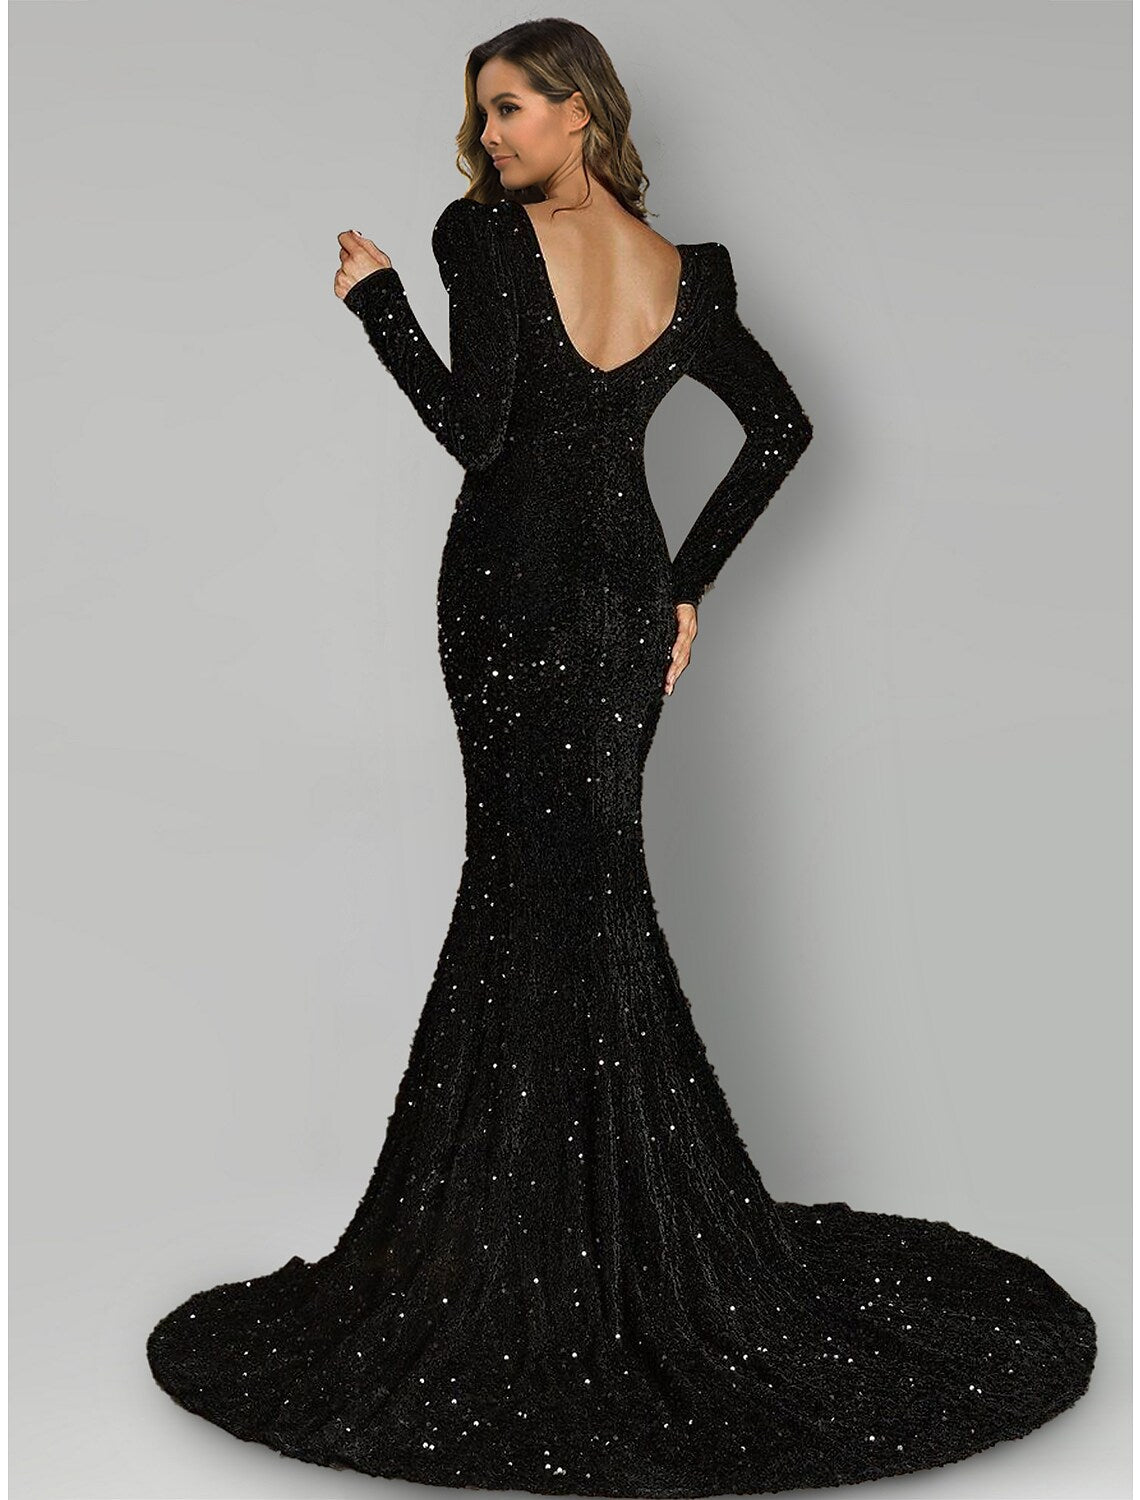 Evening Gown Black Dress Formal Court Train Long Sleeve Square Neck Sequined